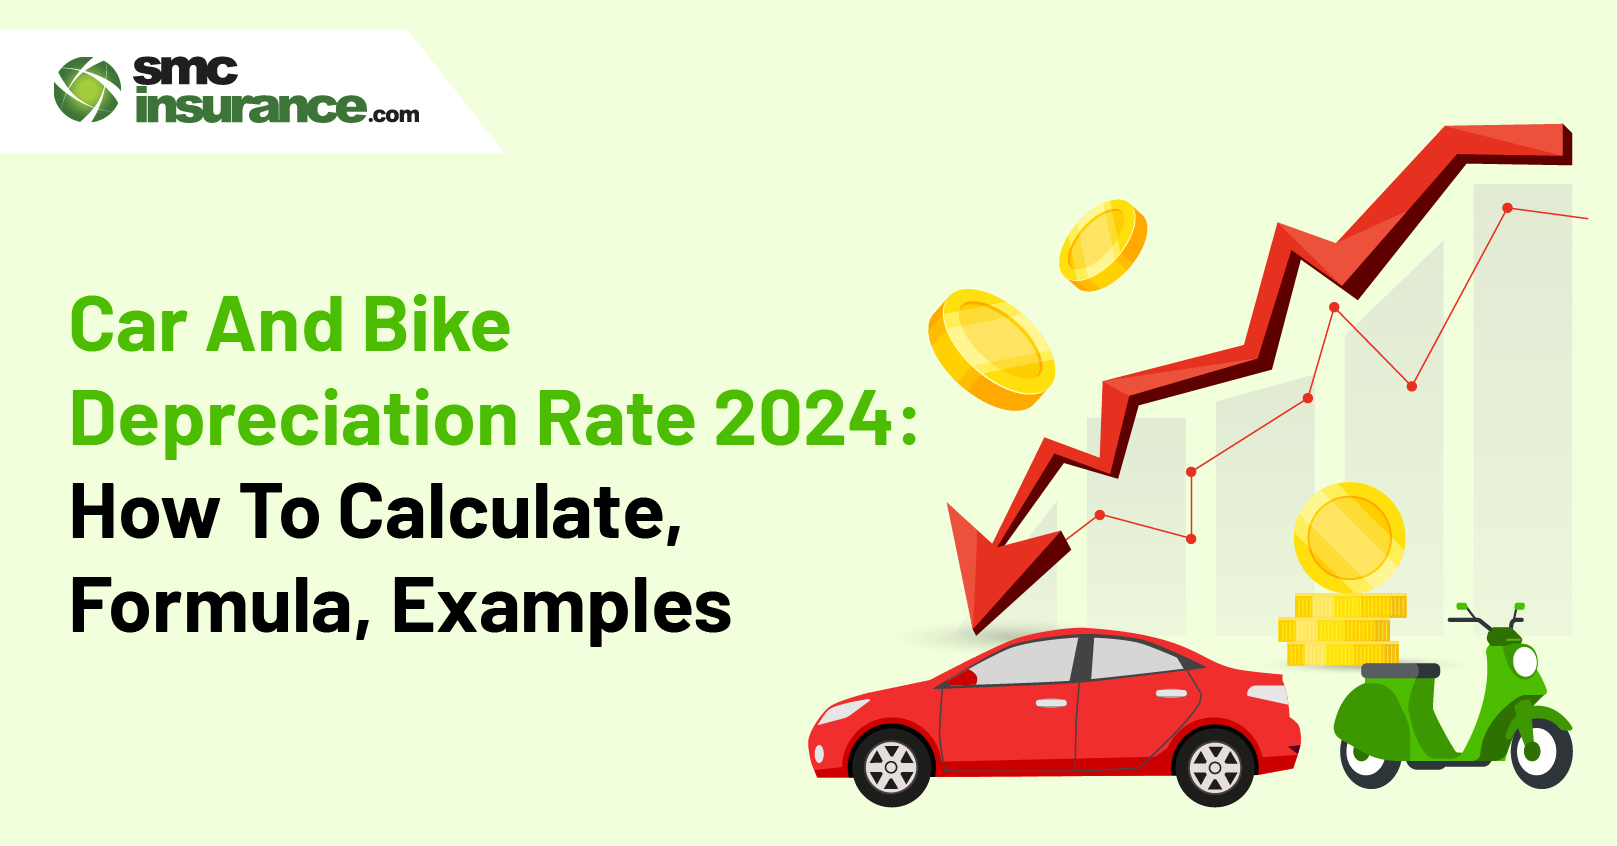 Car And Bike Depreciation Rate 2024: How To Calculate, Formula, Examples